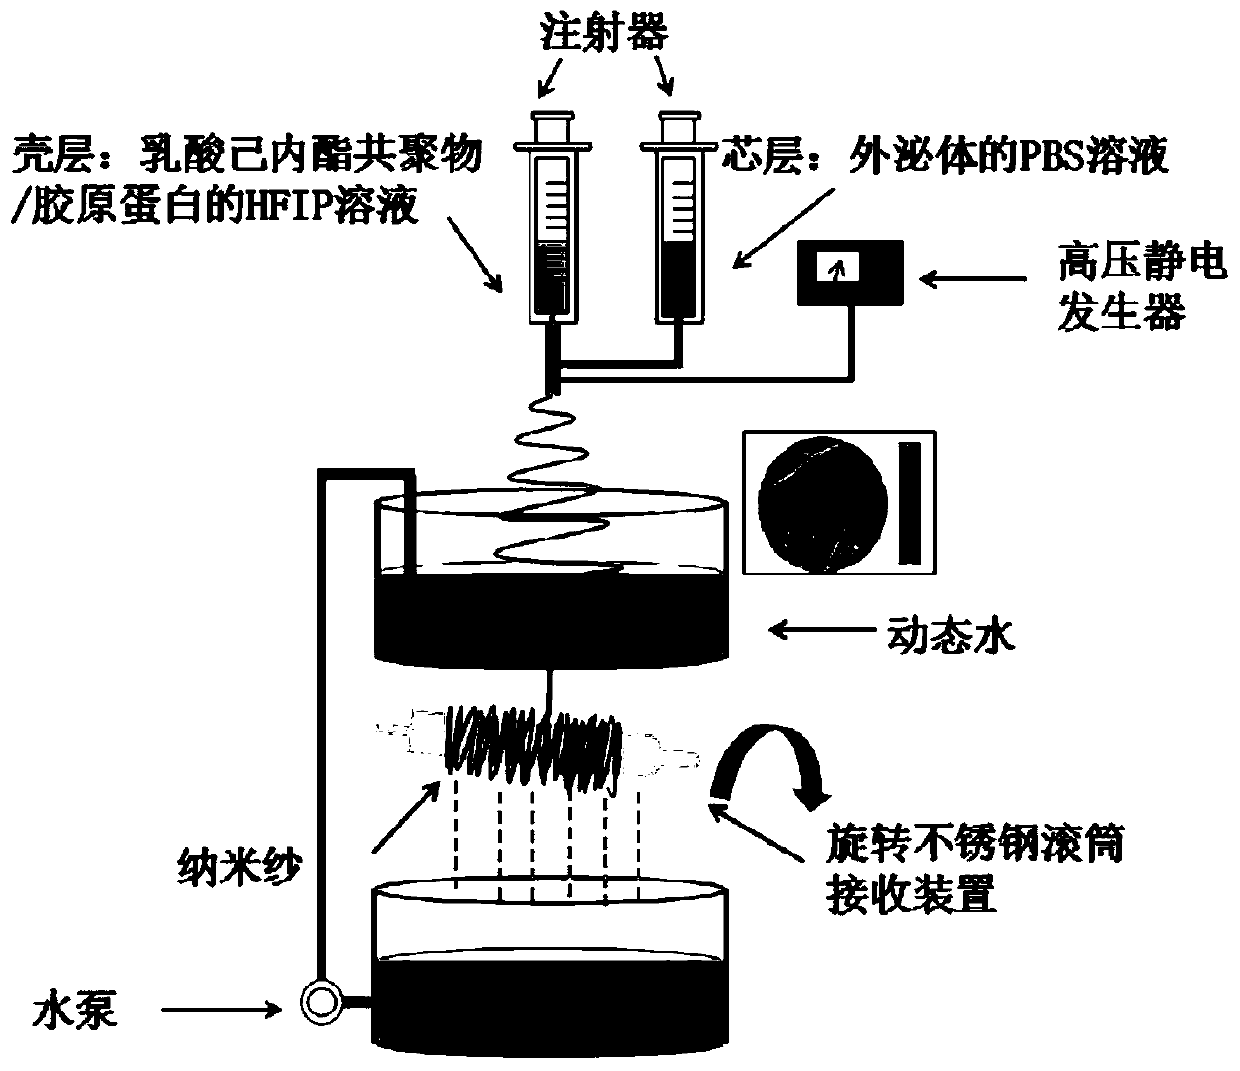 Microballons/nanometer yarn composite bracket loaded with exosomes and growth factors and preparation method of microballons/nanometer yarn composite bracket